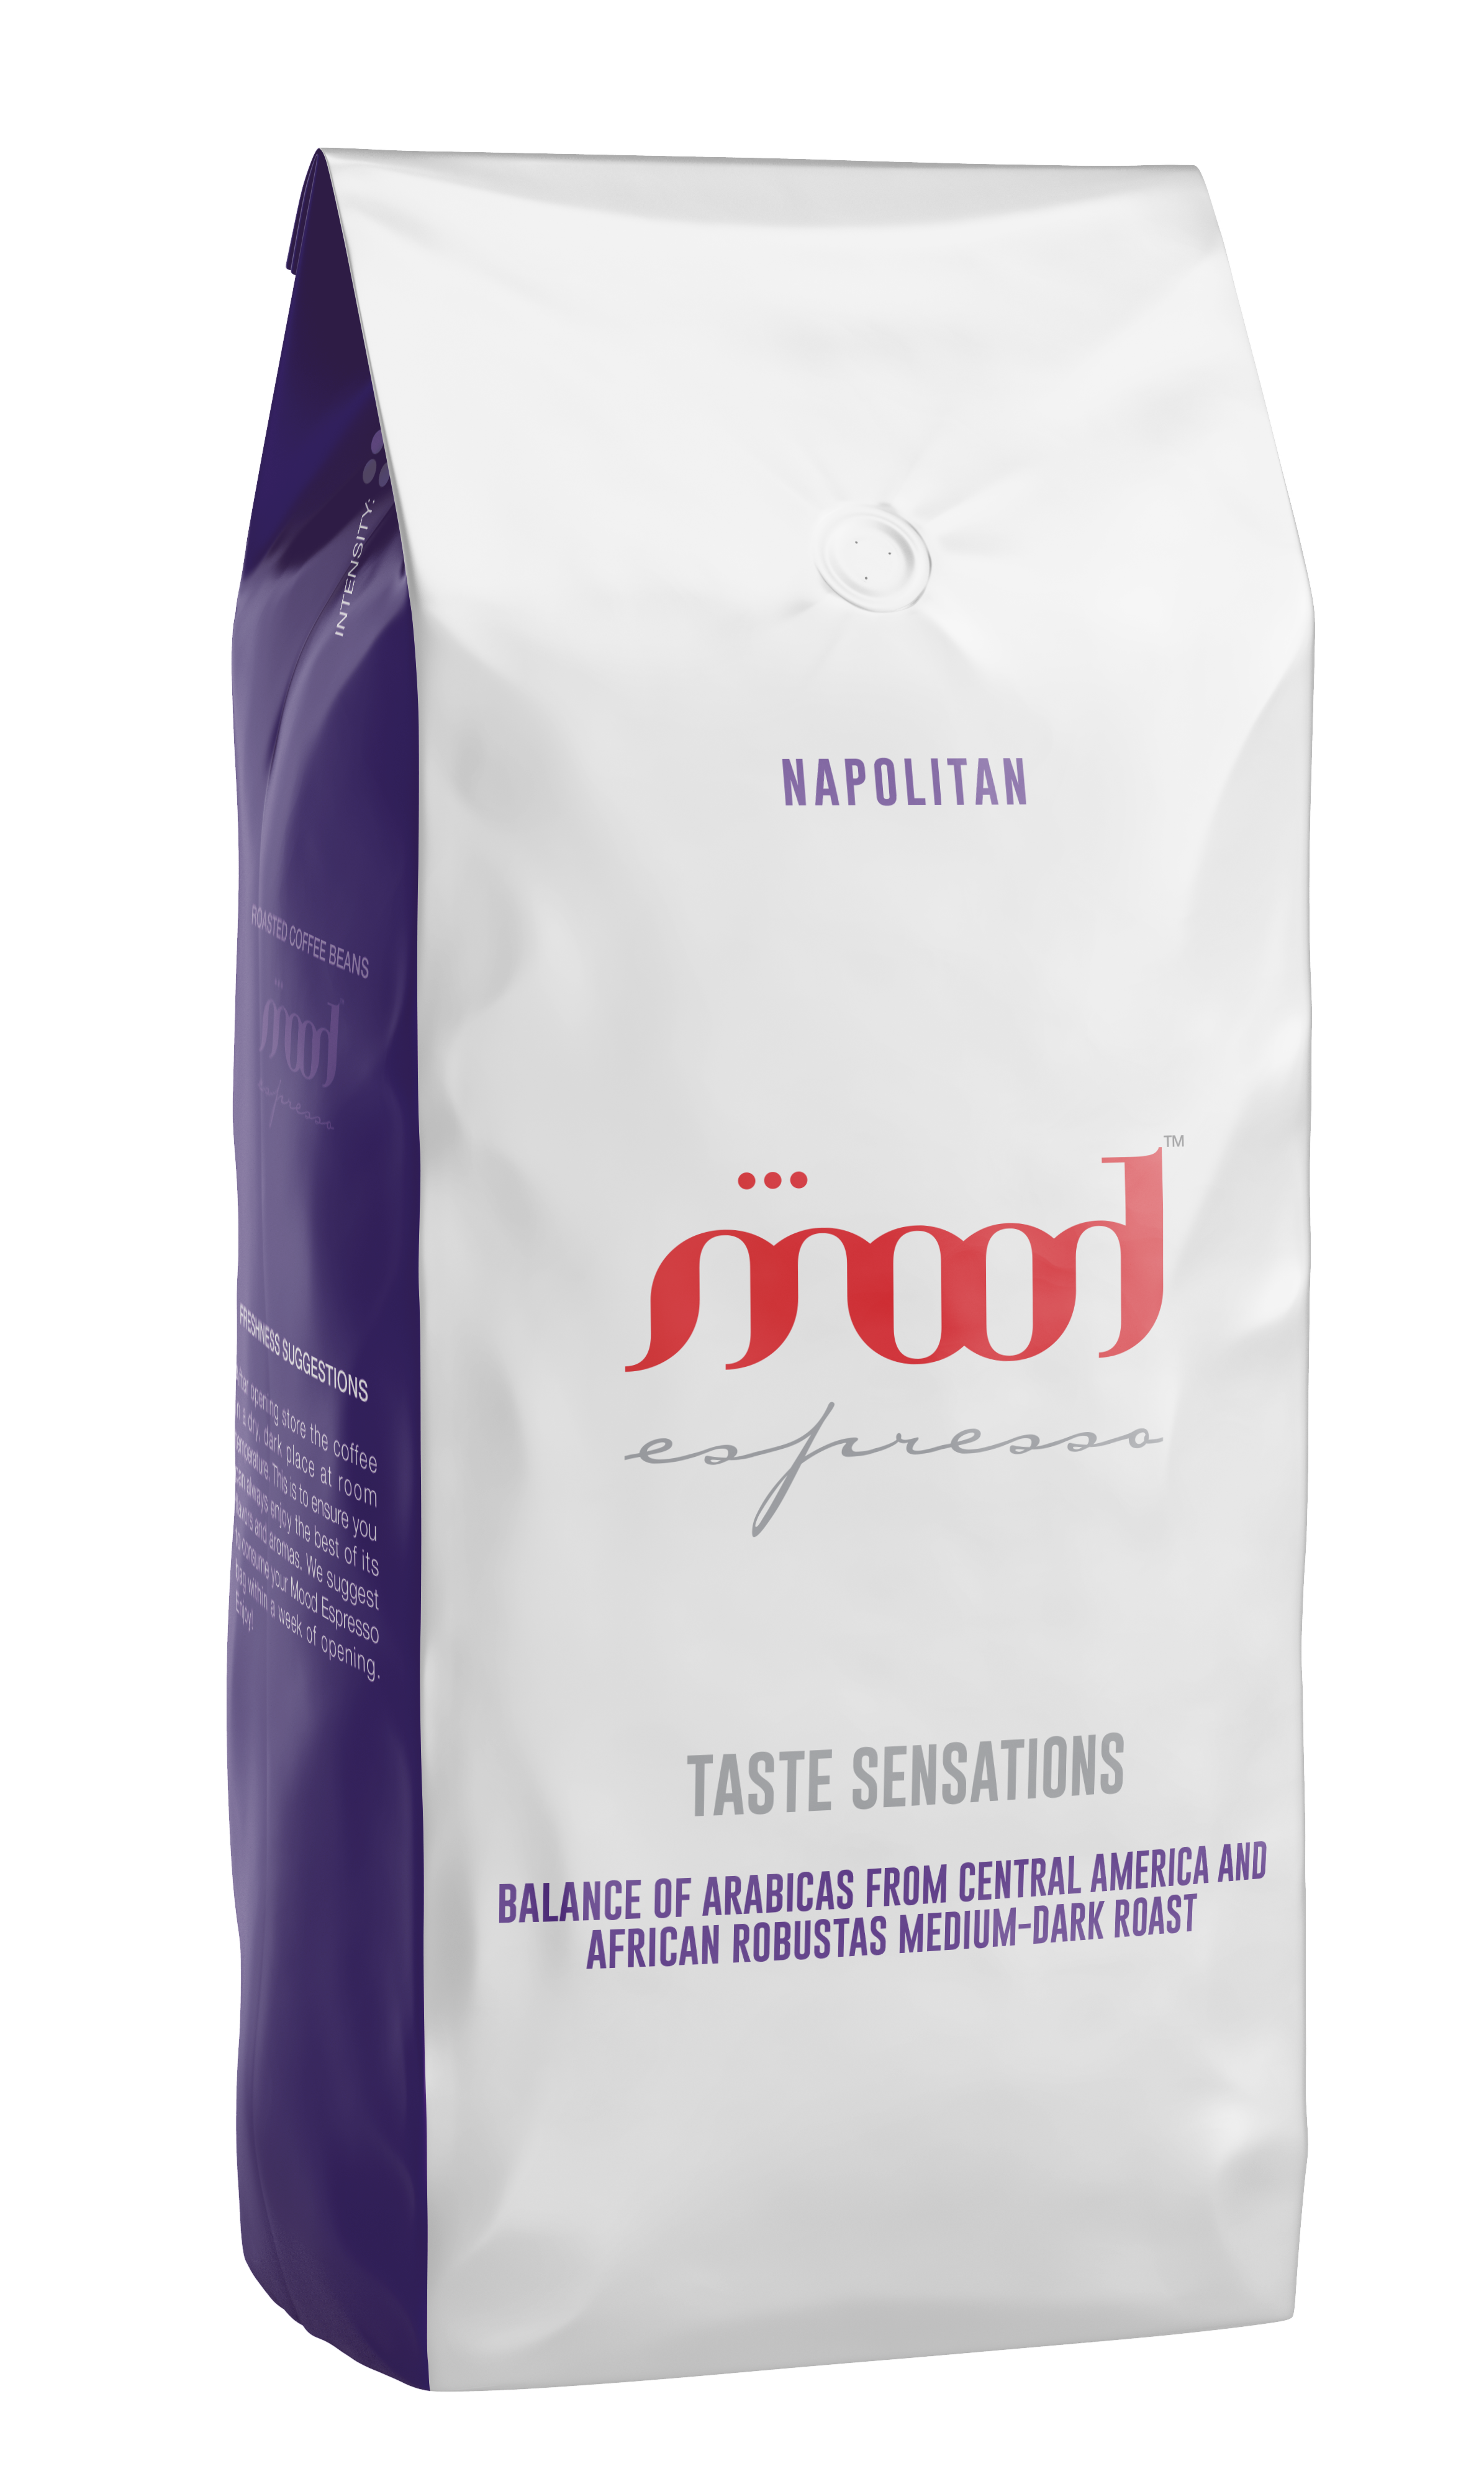 napolitan blend arabica from central america and robusta from africa. medium dark roast